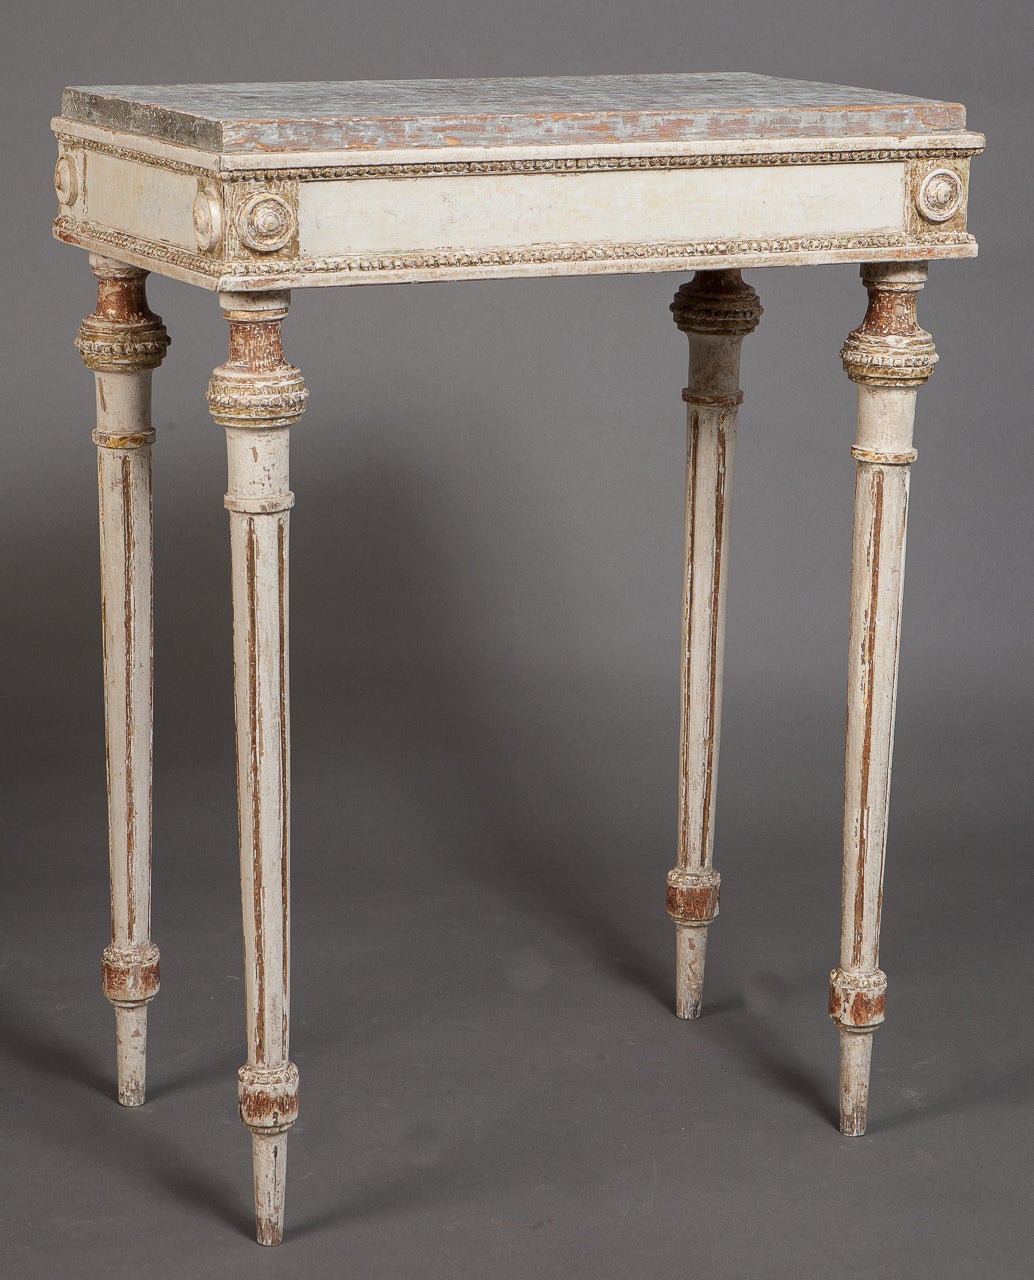 An 18th Century Swedish Console Table